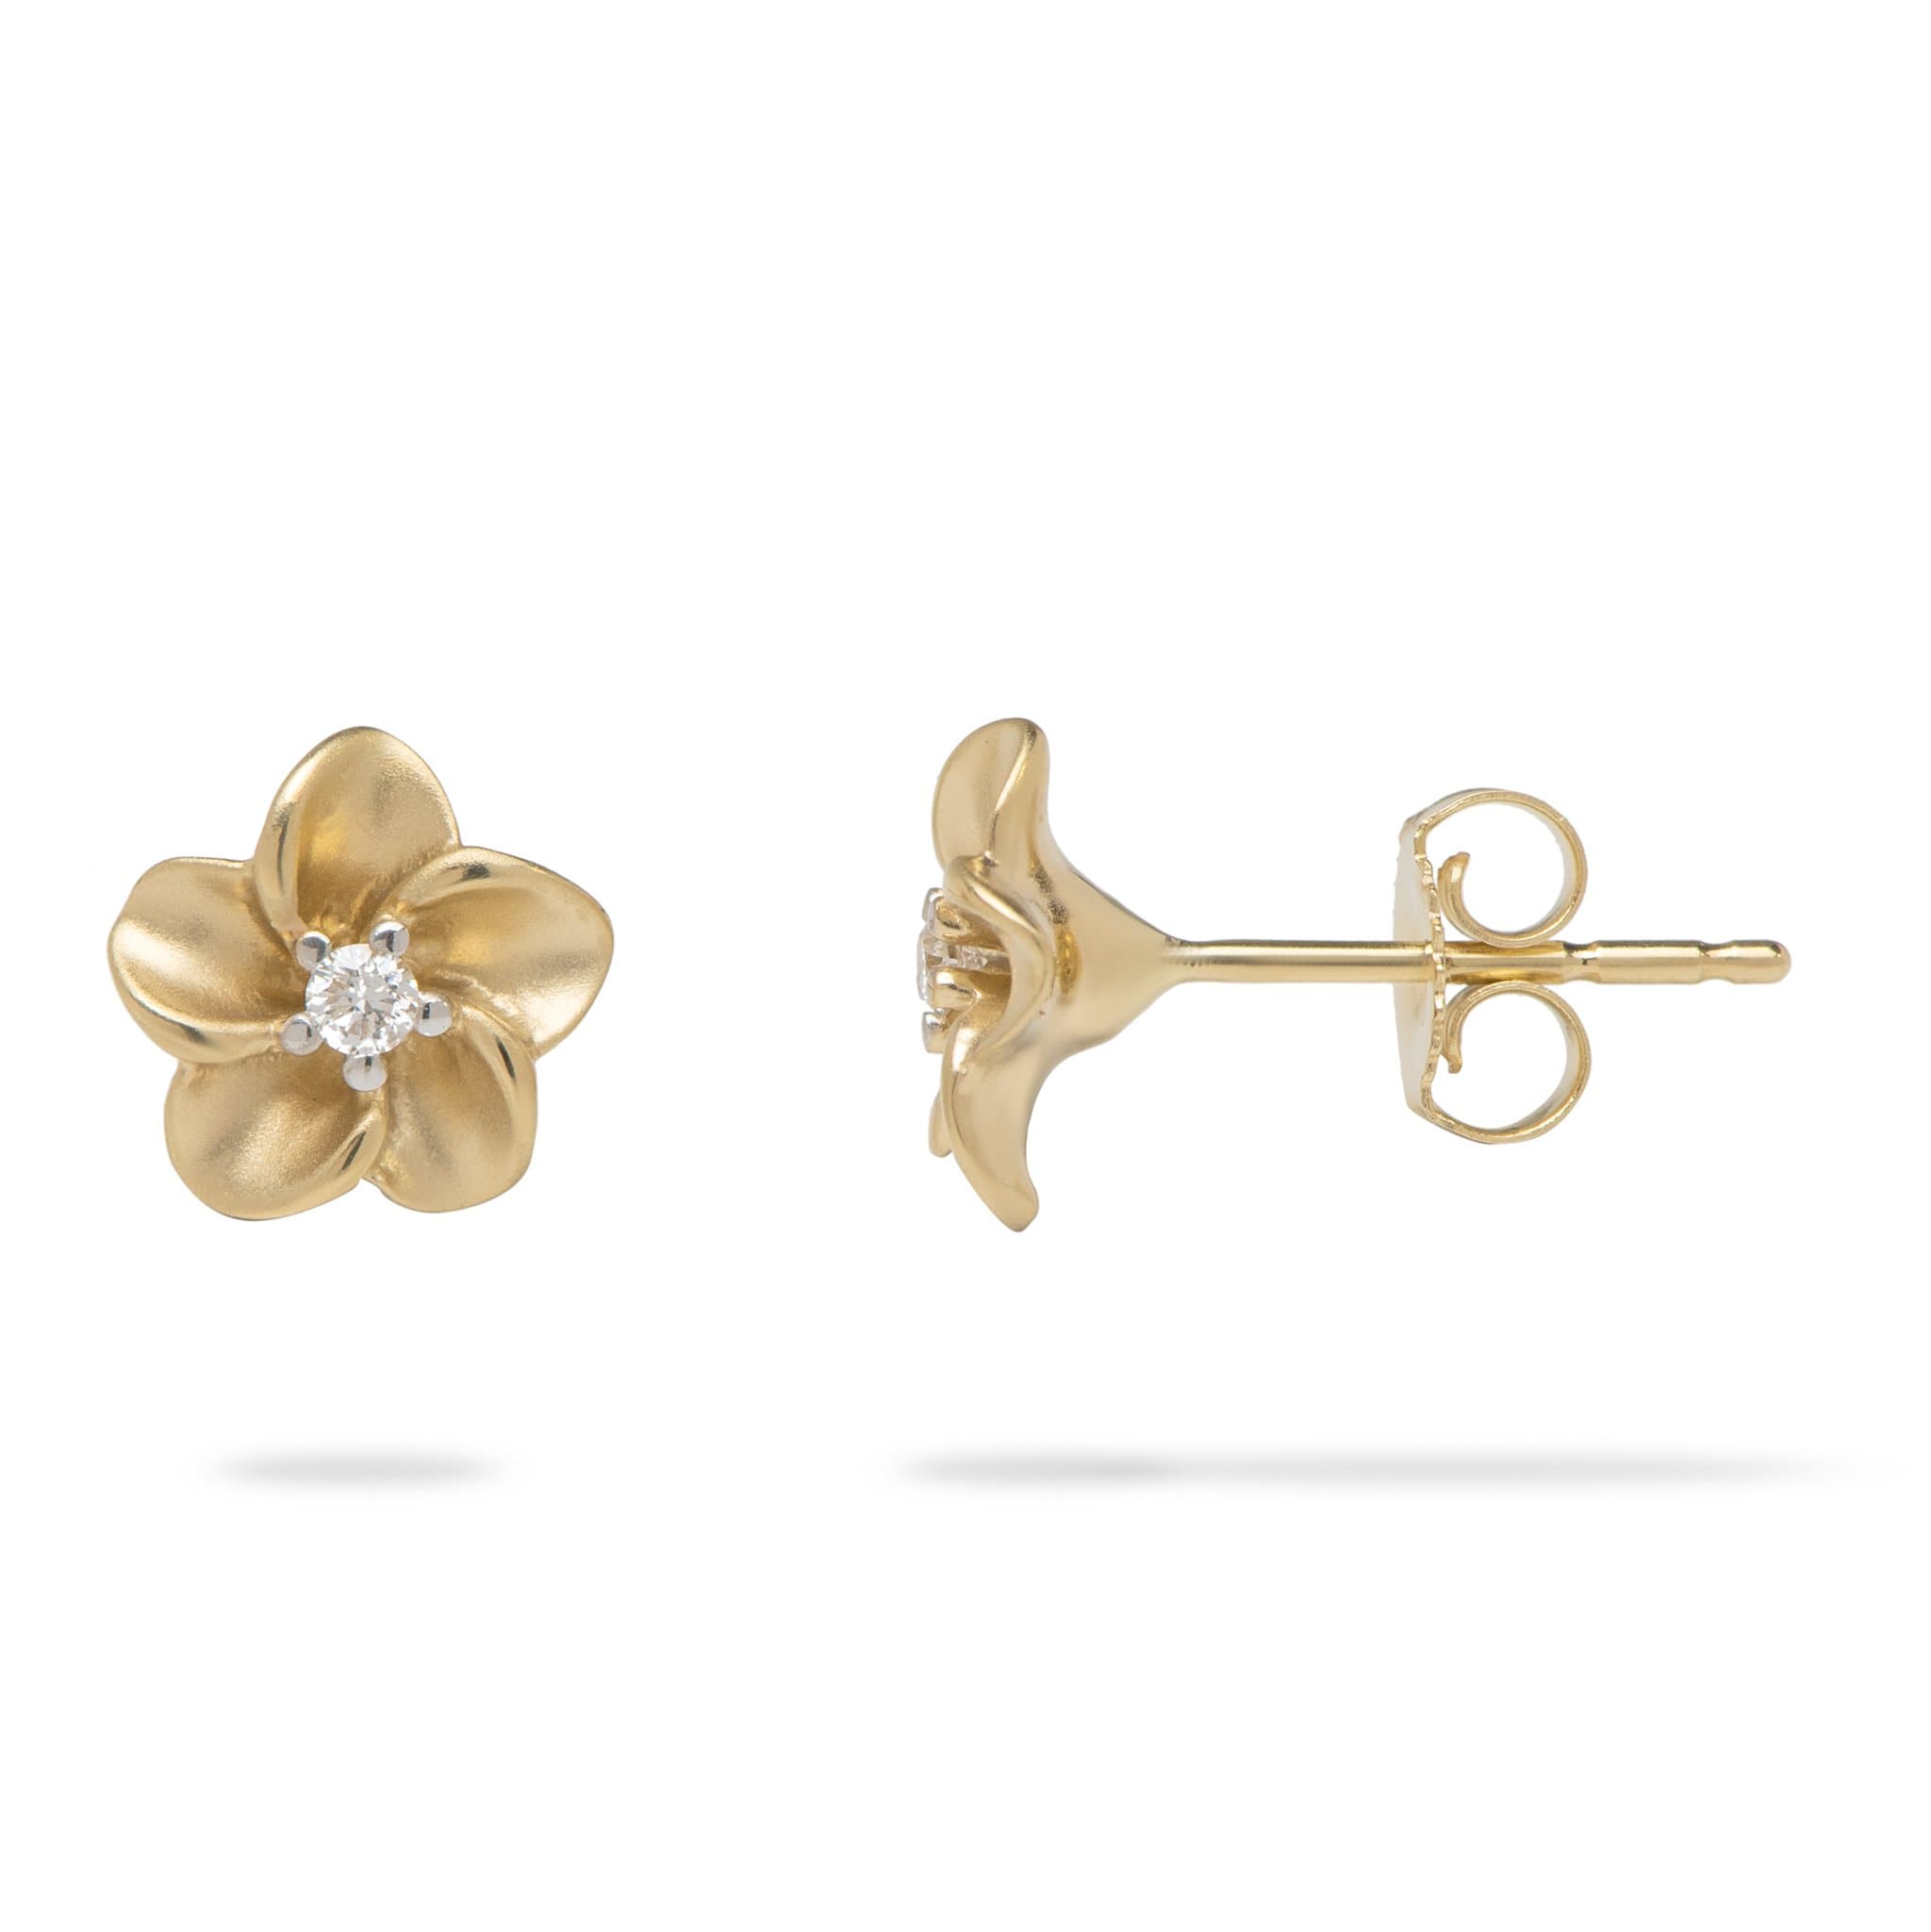 Plumeria Earrings in Gold with Diamonds - 8mm – Maui Divers Jewelry